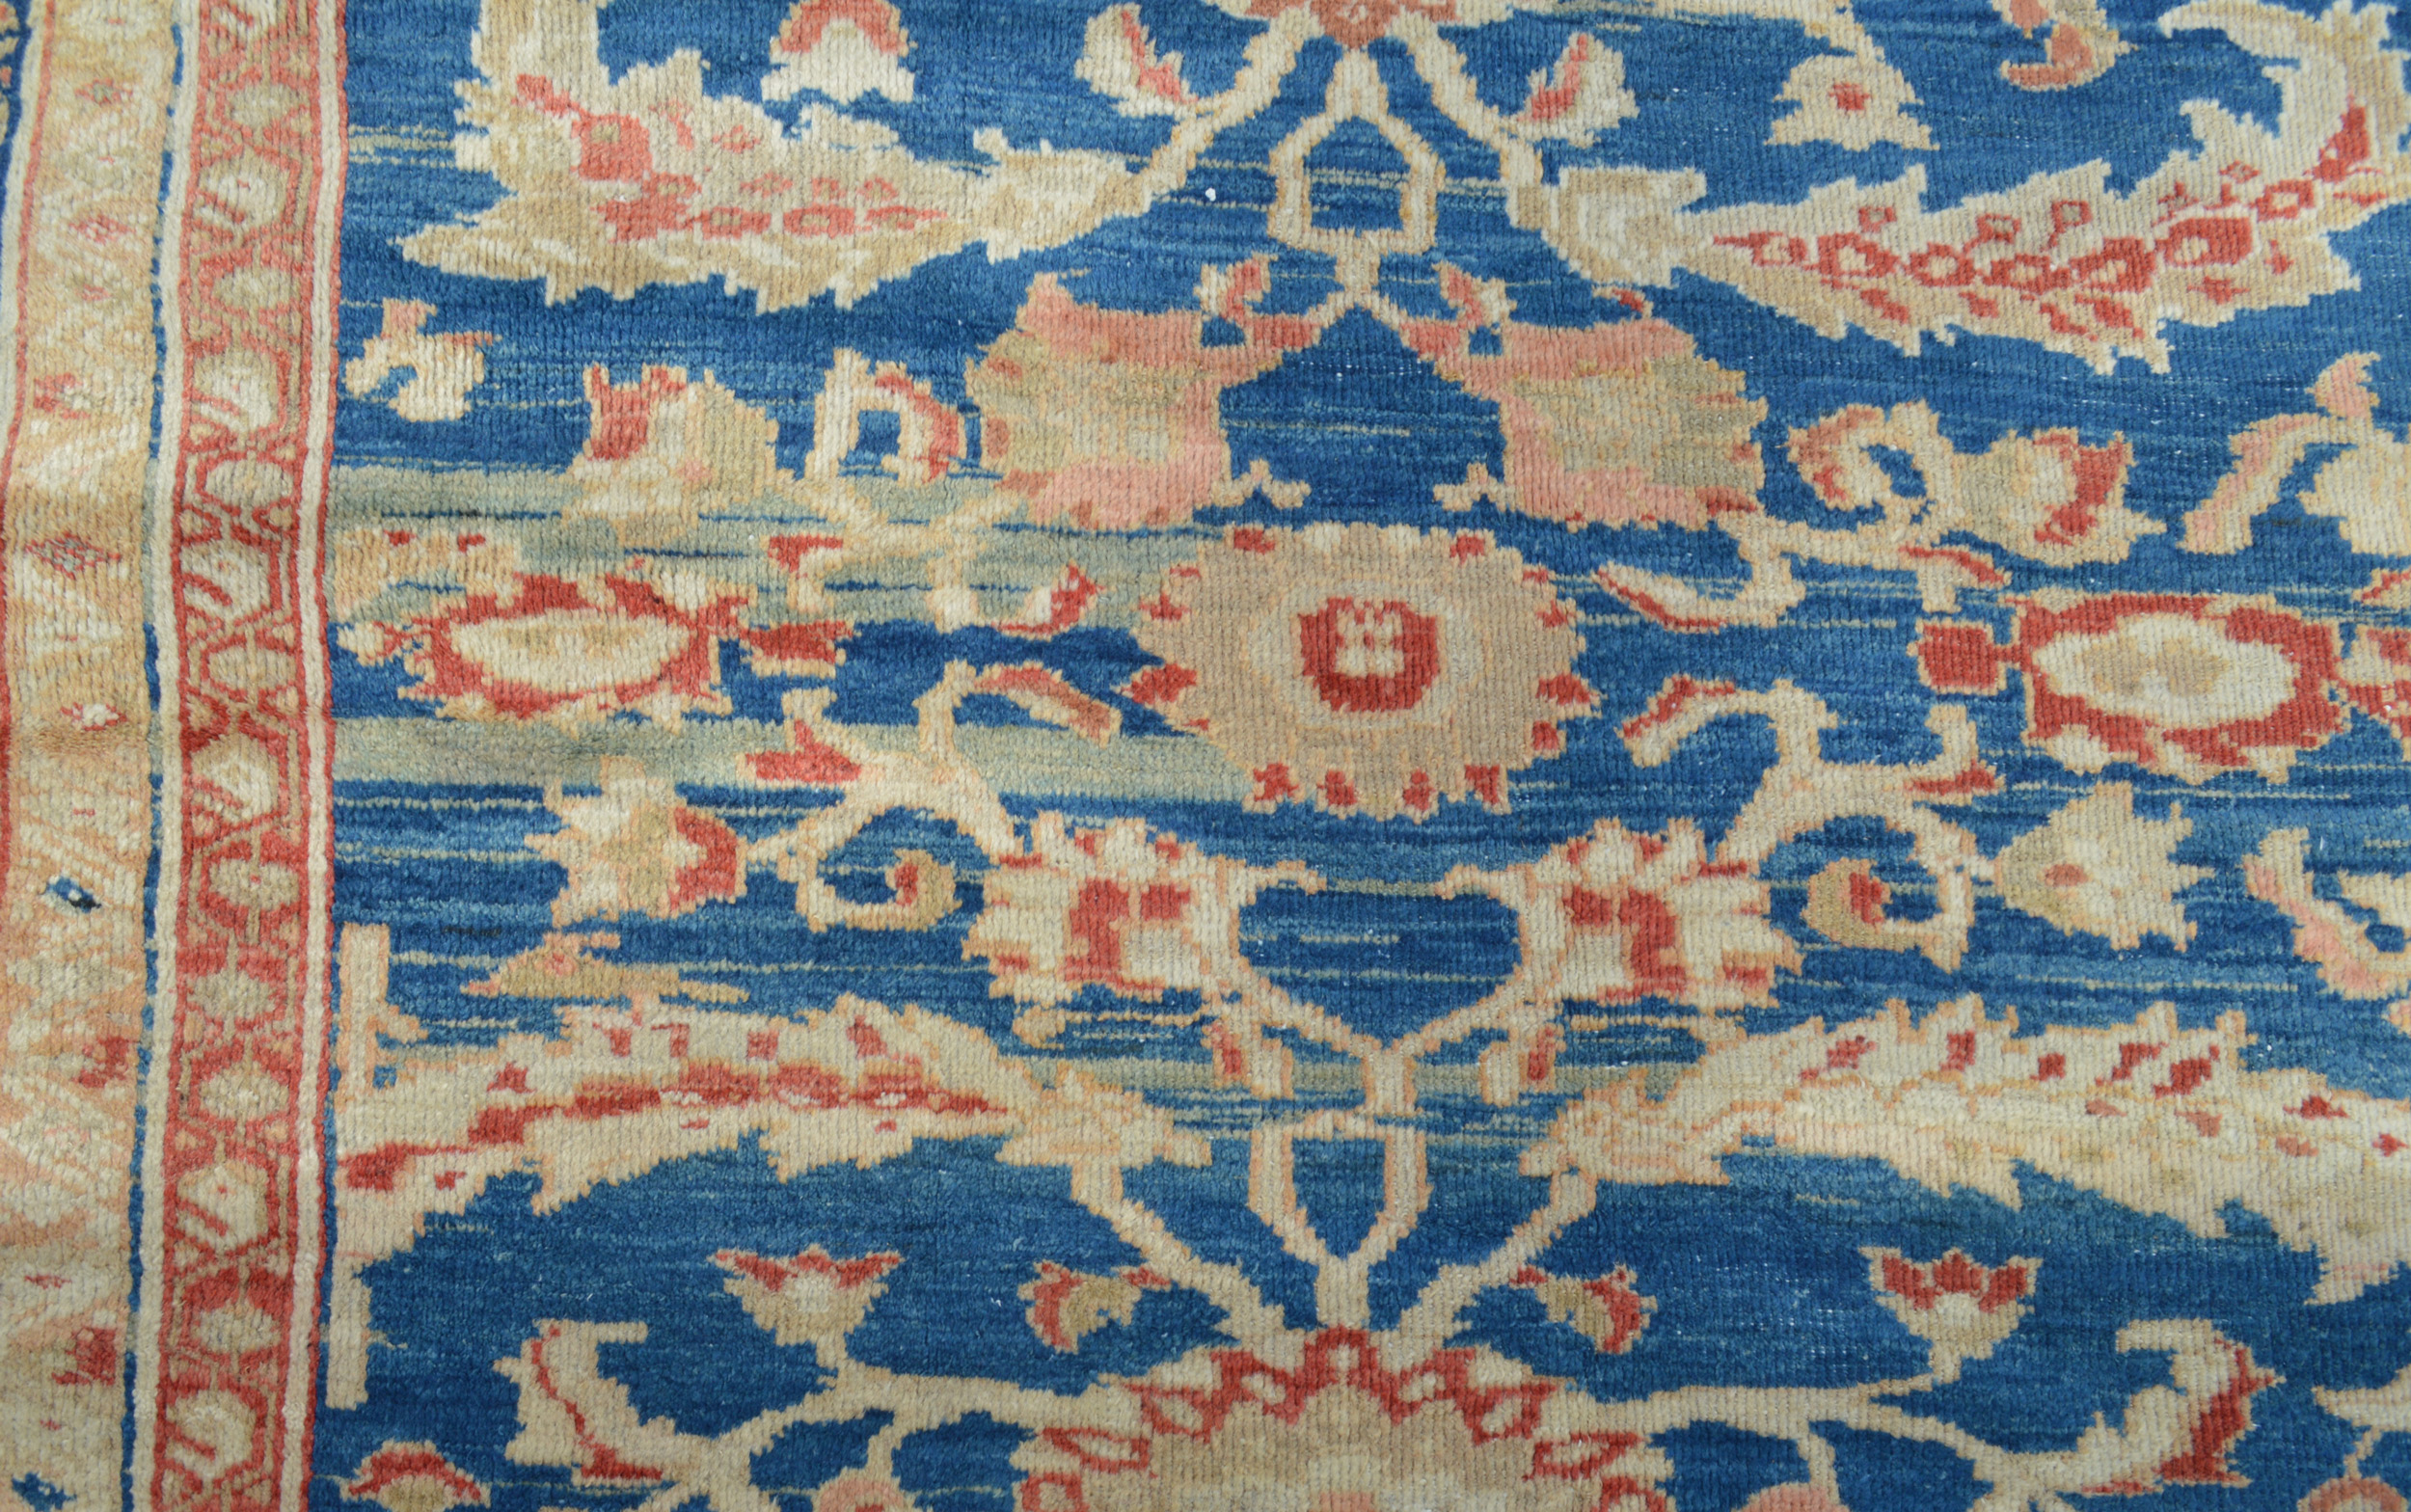 Detail of beautiful abrash (variegated color produced by changes in dye lots) in a 19th century Persian Sultanabad carpet - Douglas Stock Gallery, antique Oriental rugs